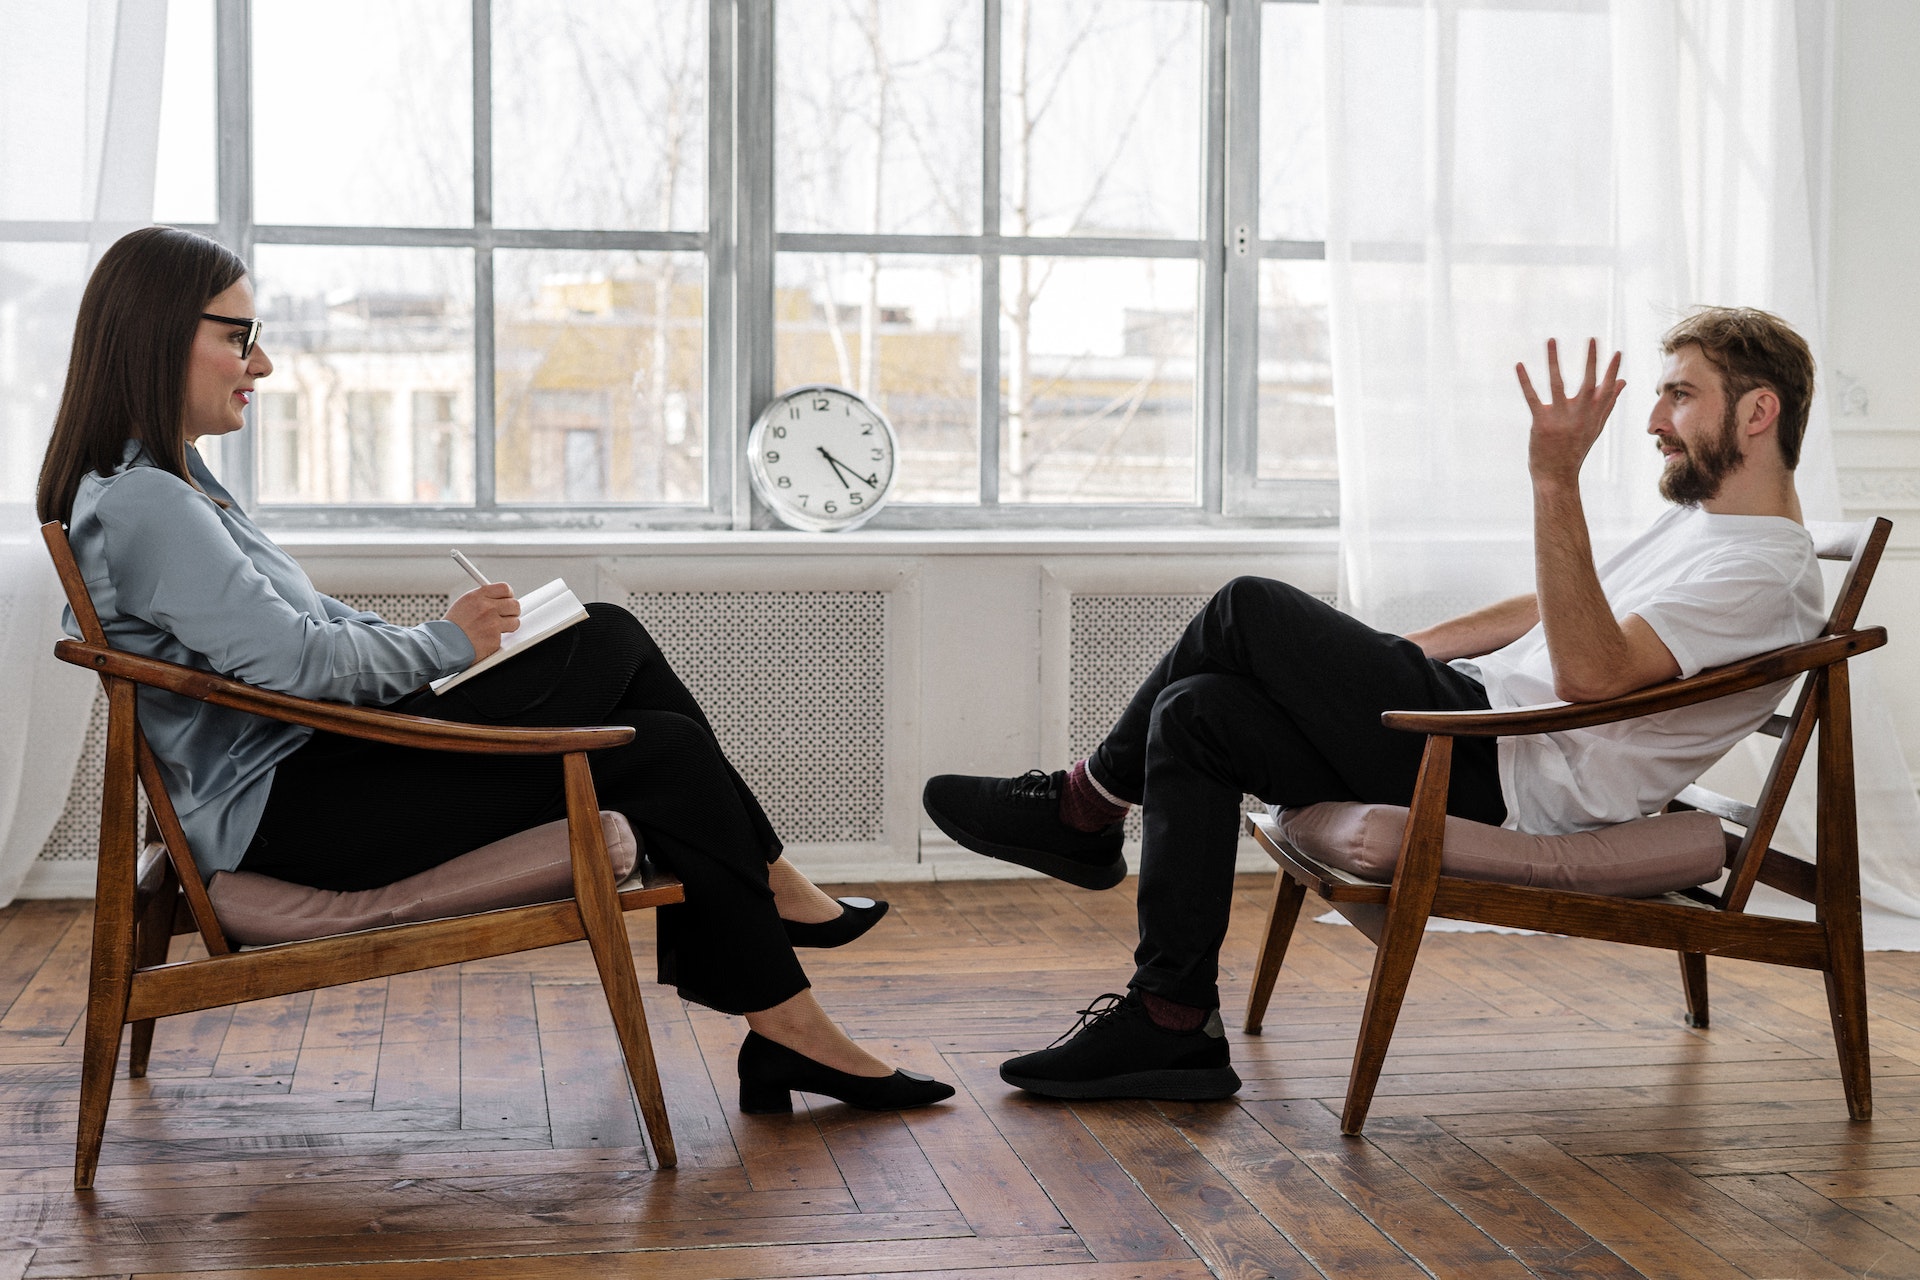 photo of a man and woman sitting on chairs in a bright room opposite each other to indicate that this may be a therapy session